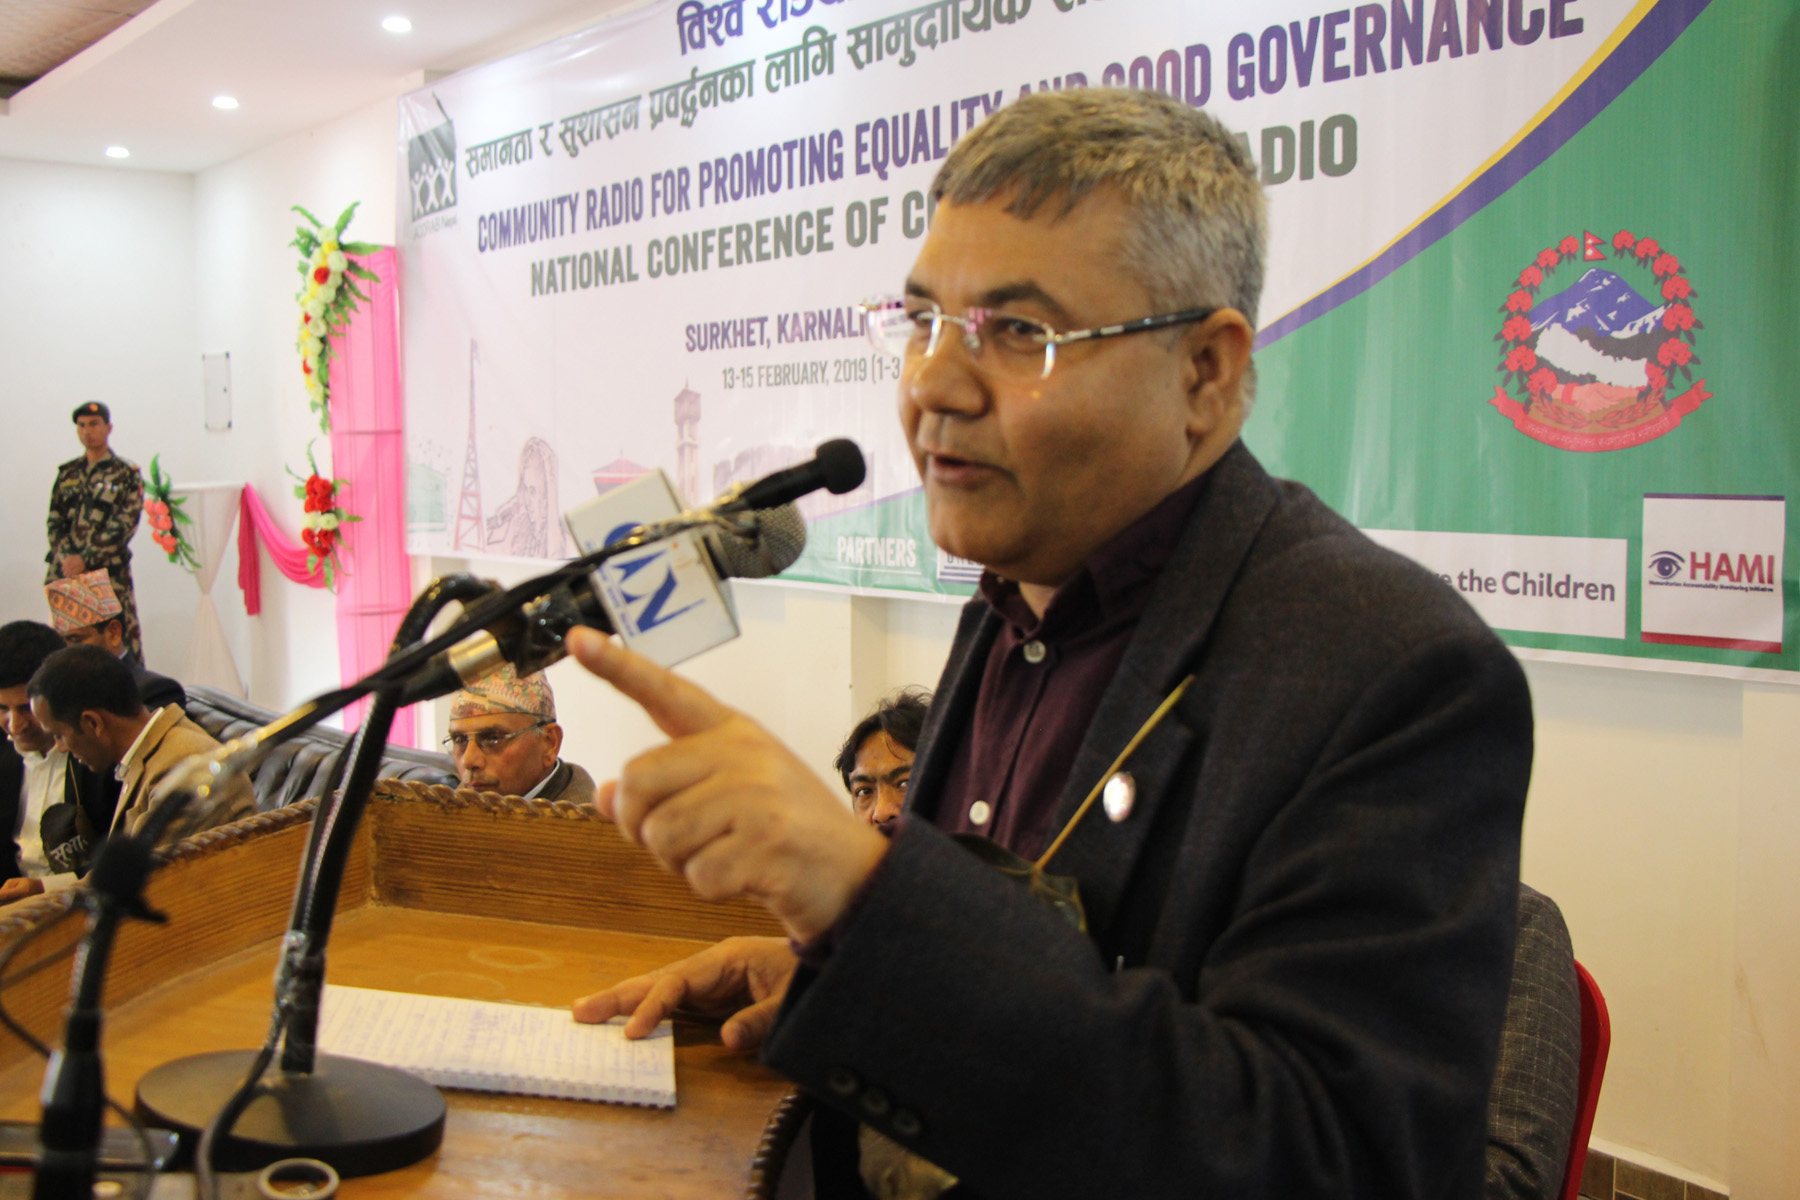 Reconstruction expedited, says Minister Baskota